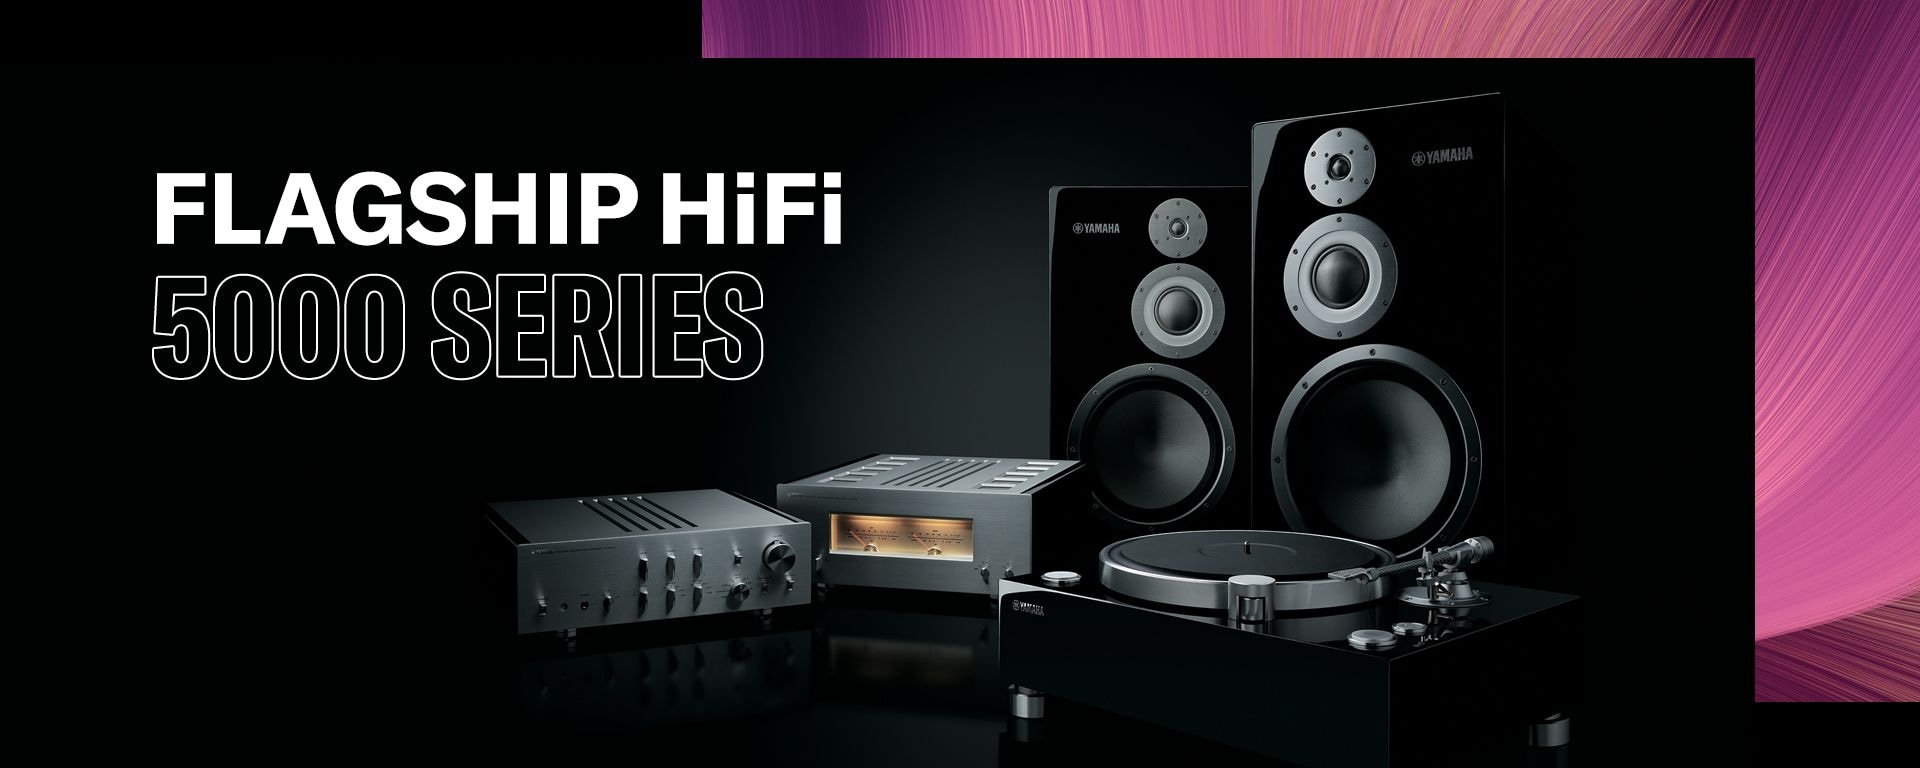 MusicCast NP-S303 - Overview - HiFi Components - Audio & Visual